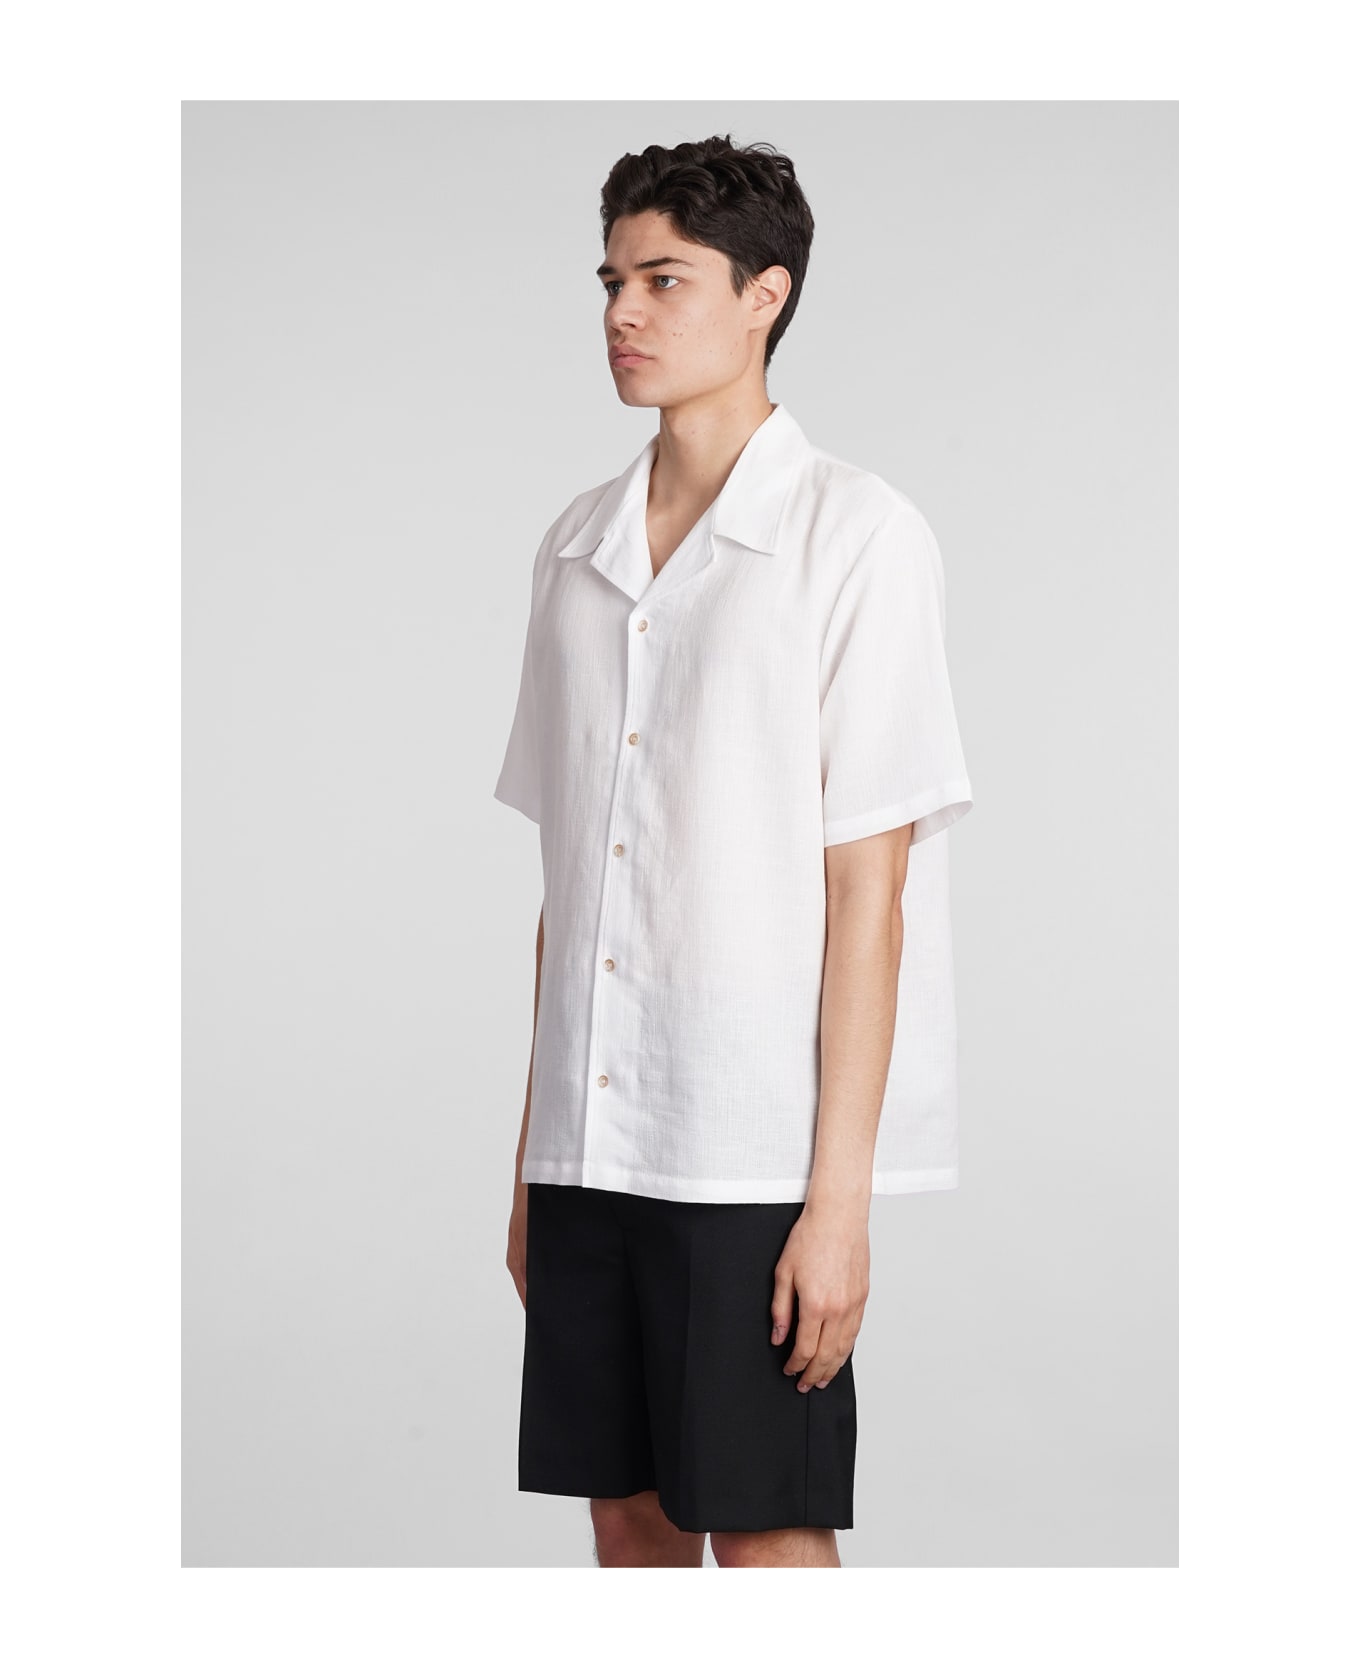 Séfr Shirt In White Cotton And Linen - white